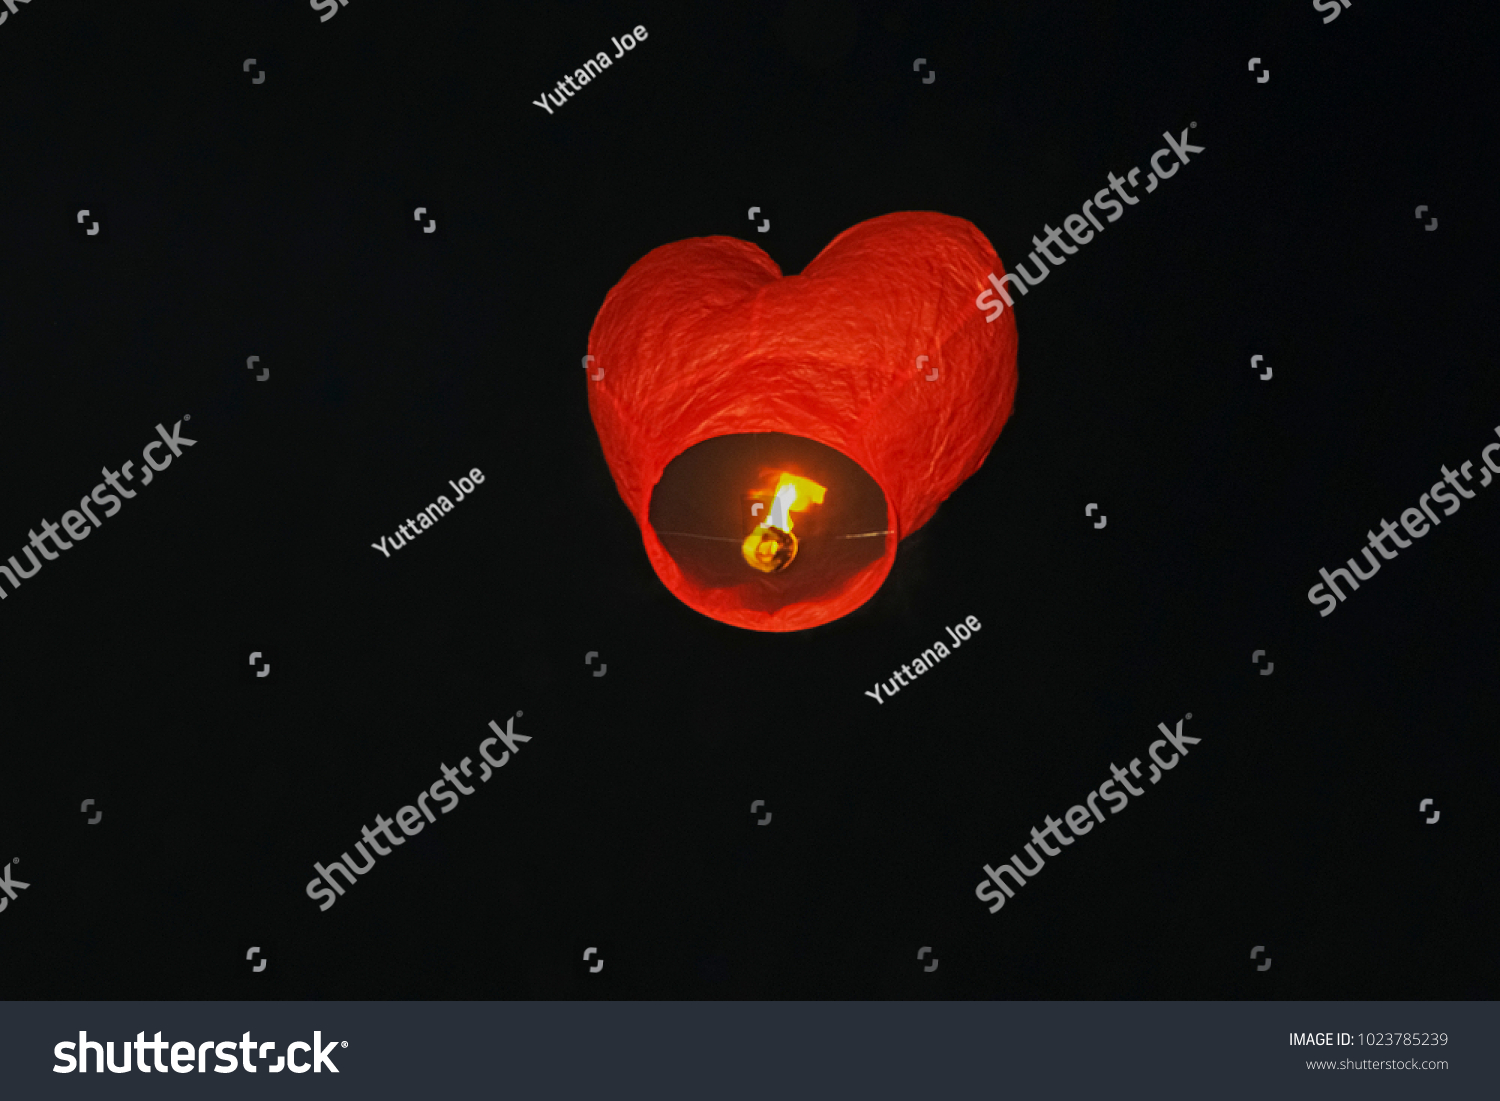 Red lantern balloon shape heart floating with dark sky background #1023785239